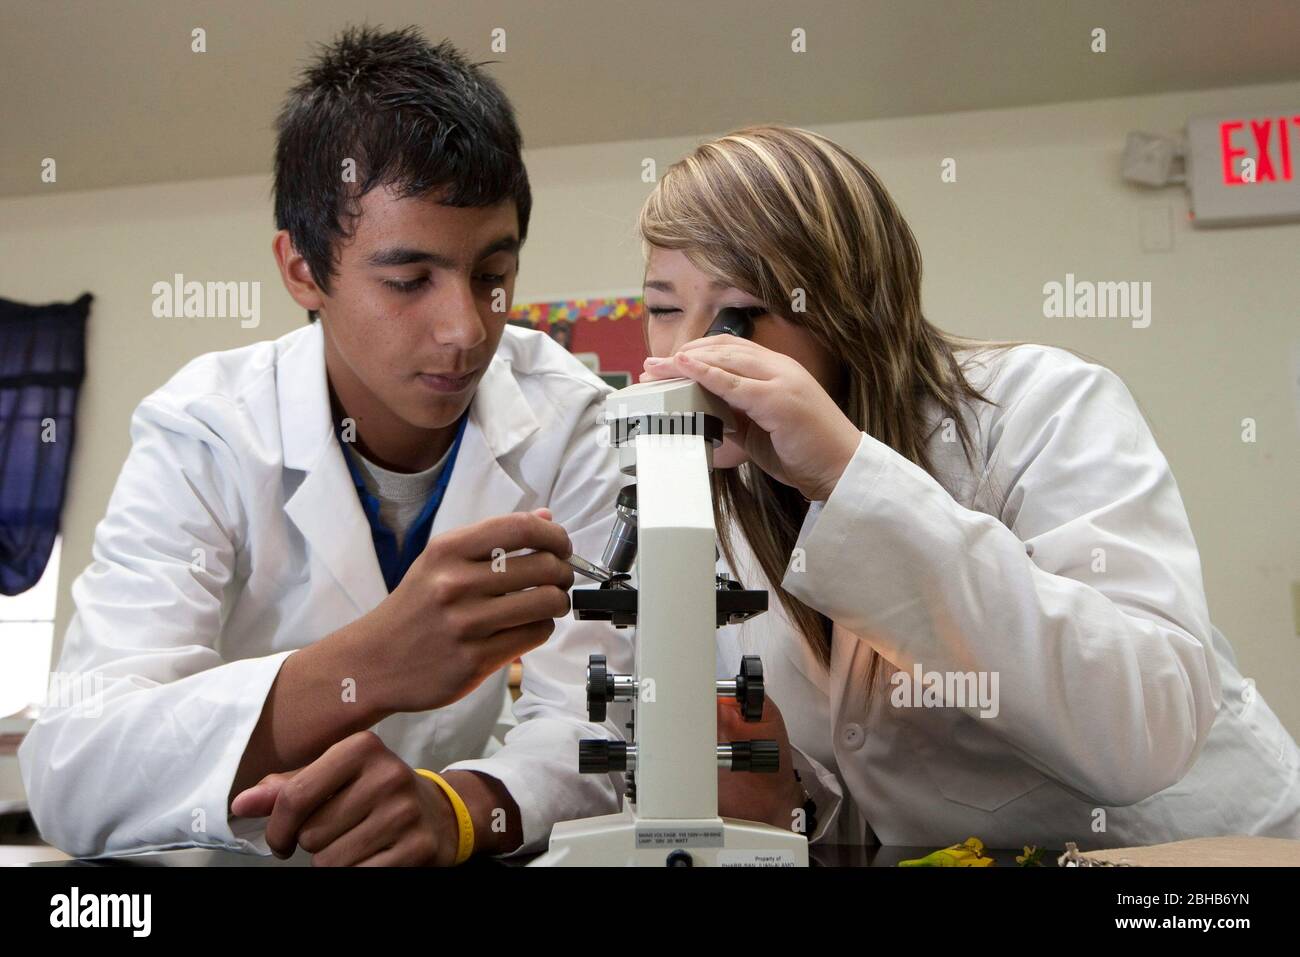 Pharr Texas USA, May 13 2010: High School students in the Pharr-San Juan-Alamo School District's Early College High School T-STEM Academy look through microscopes at plant samples in the biology lab.  The school gives students the option of earning college credit while taking advanced high school courses and getting a head start on college.  ©Bob Daemmrich Stock Photo